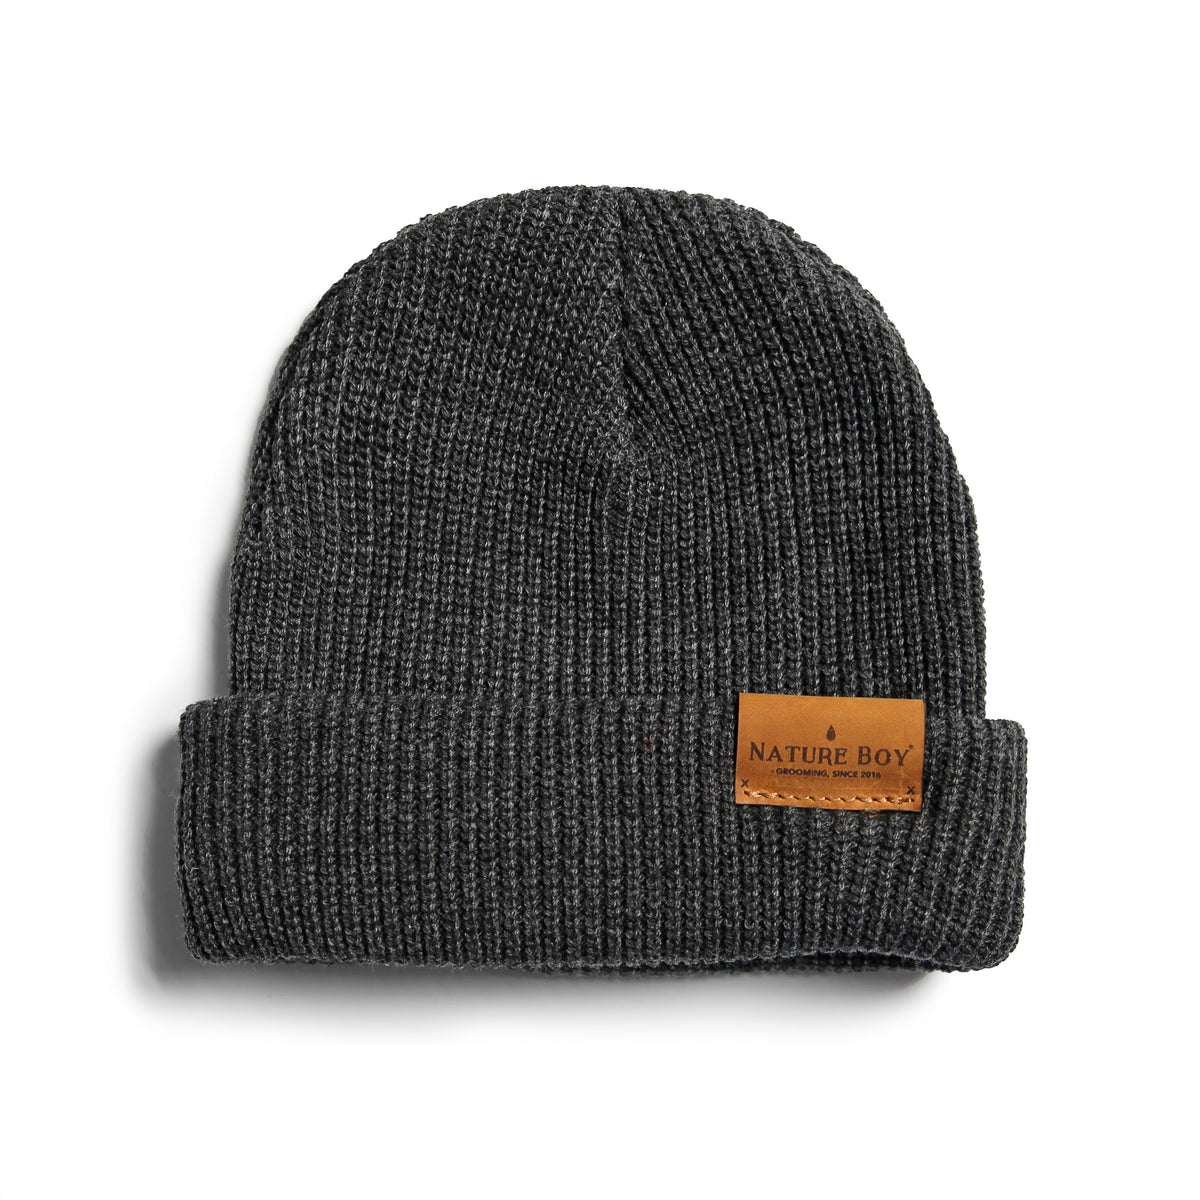 NATURE BOY Fisherman's Beanie - Charcoal – Nature Boy Products